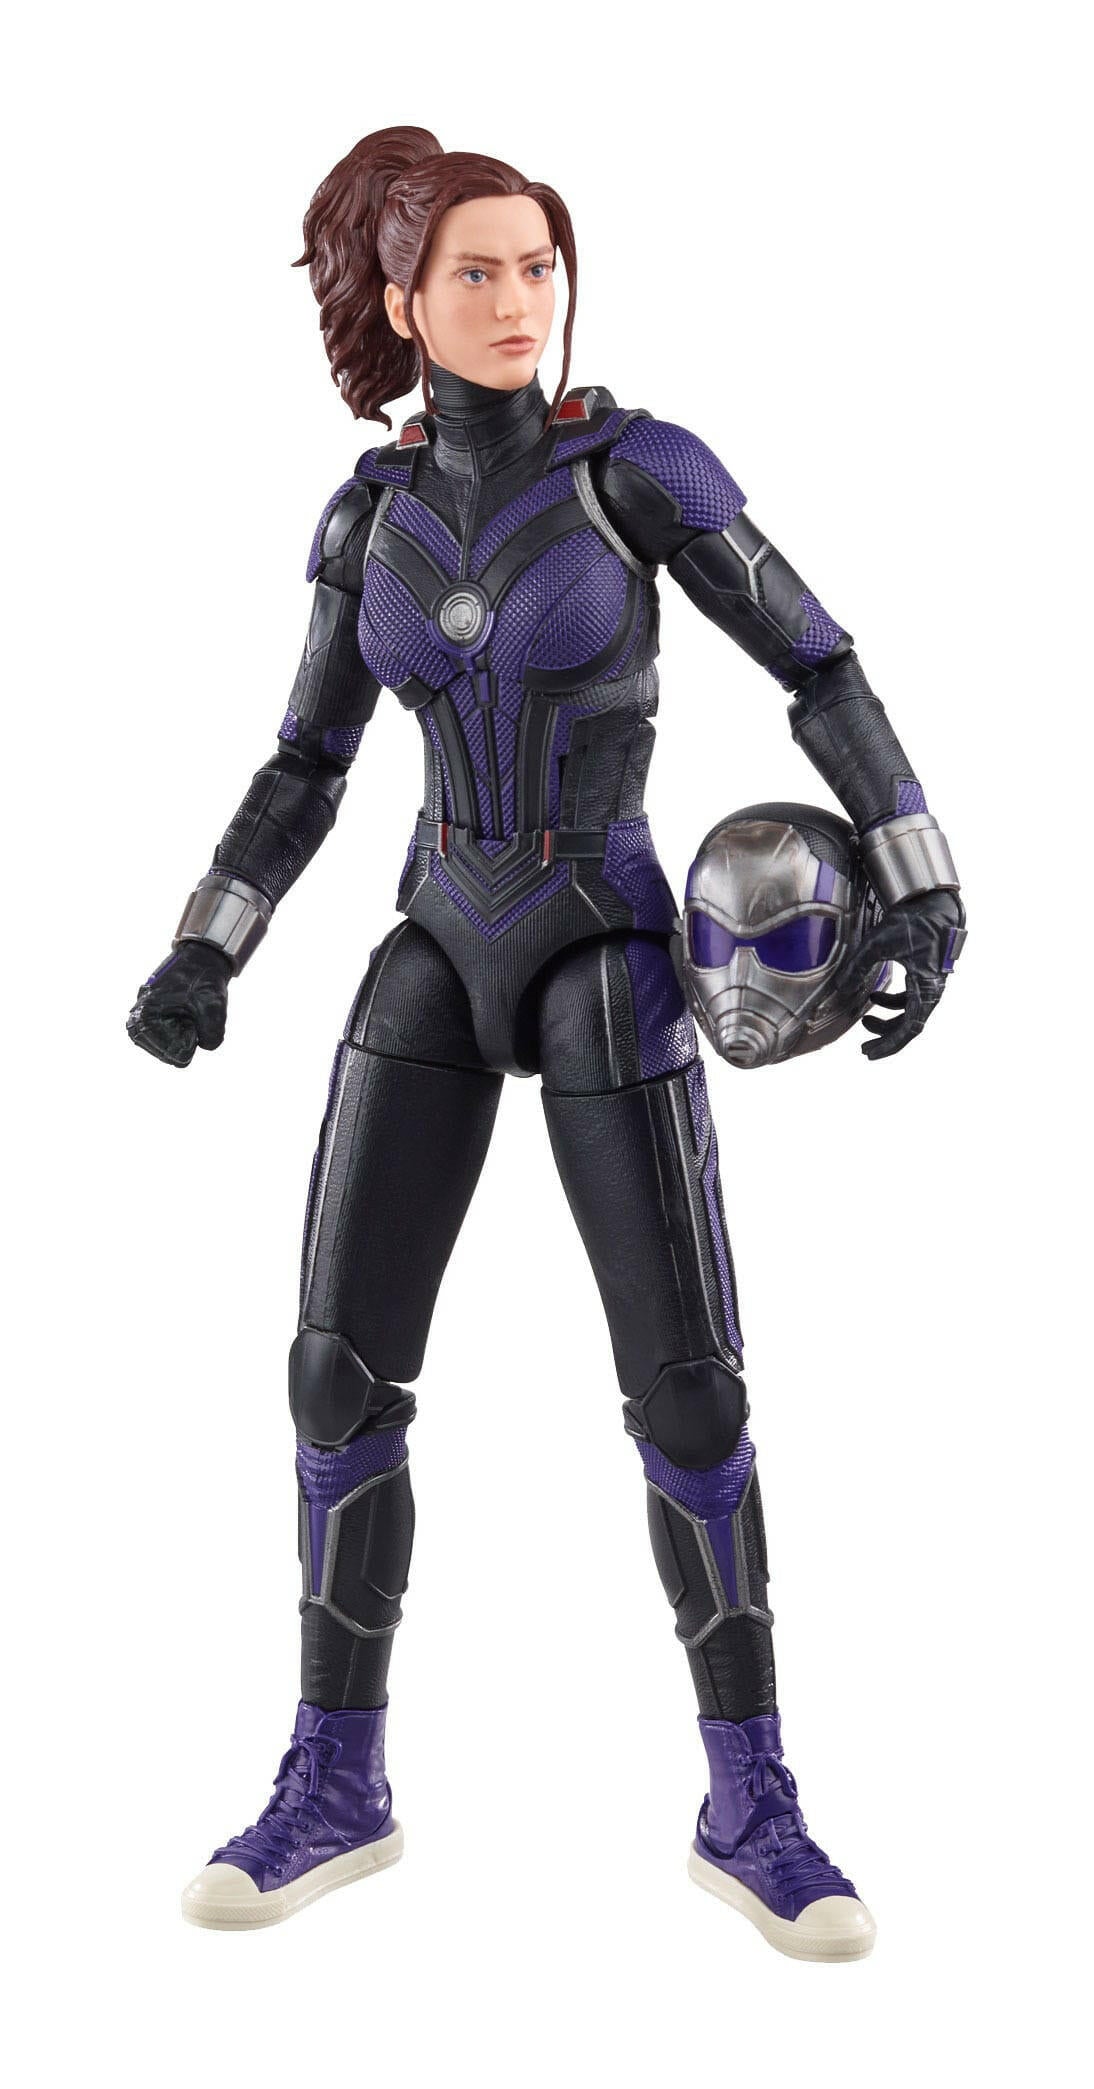 Marvel Legends Ant-Man and the Wasp: Quantumania Actionfigur BAF: Cassie Lang Kang the Conquerer 15cm Hasbro